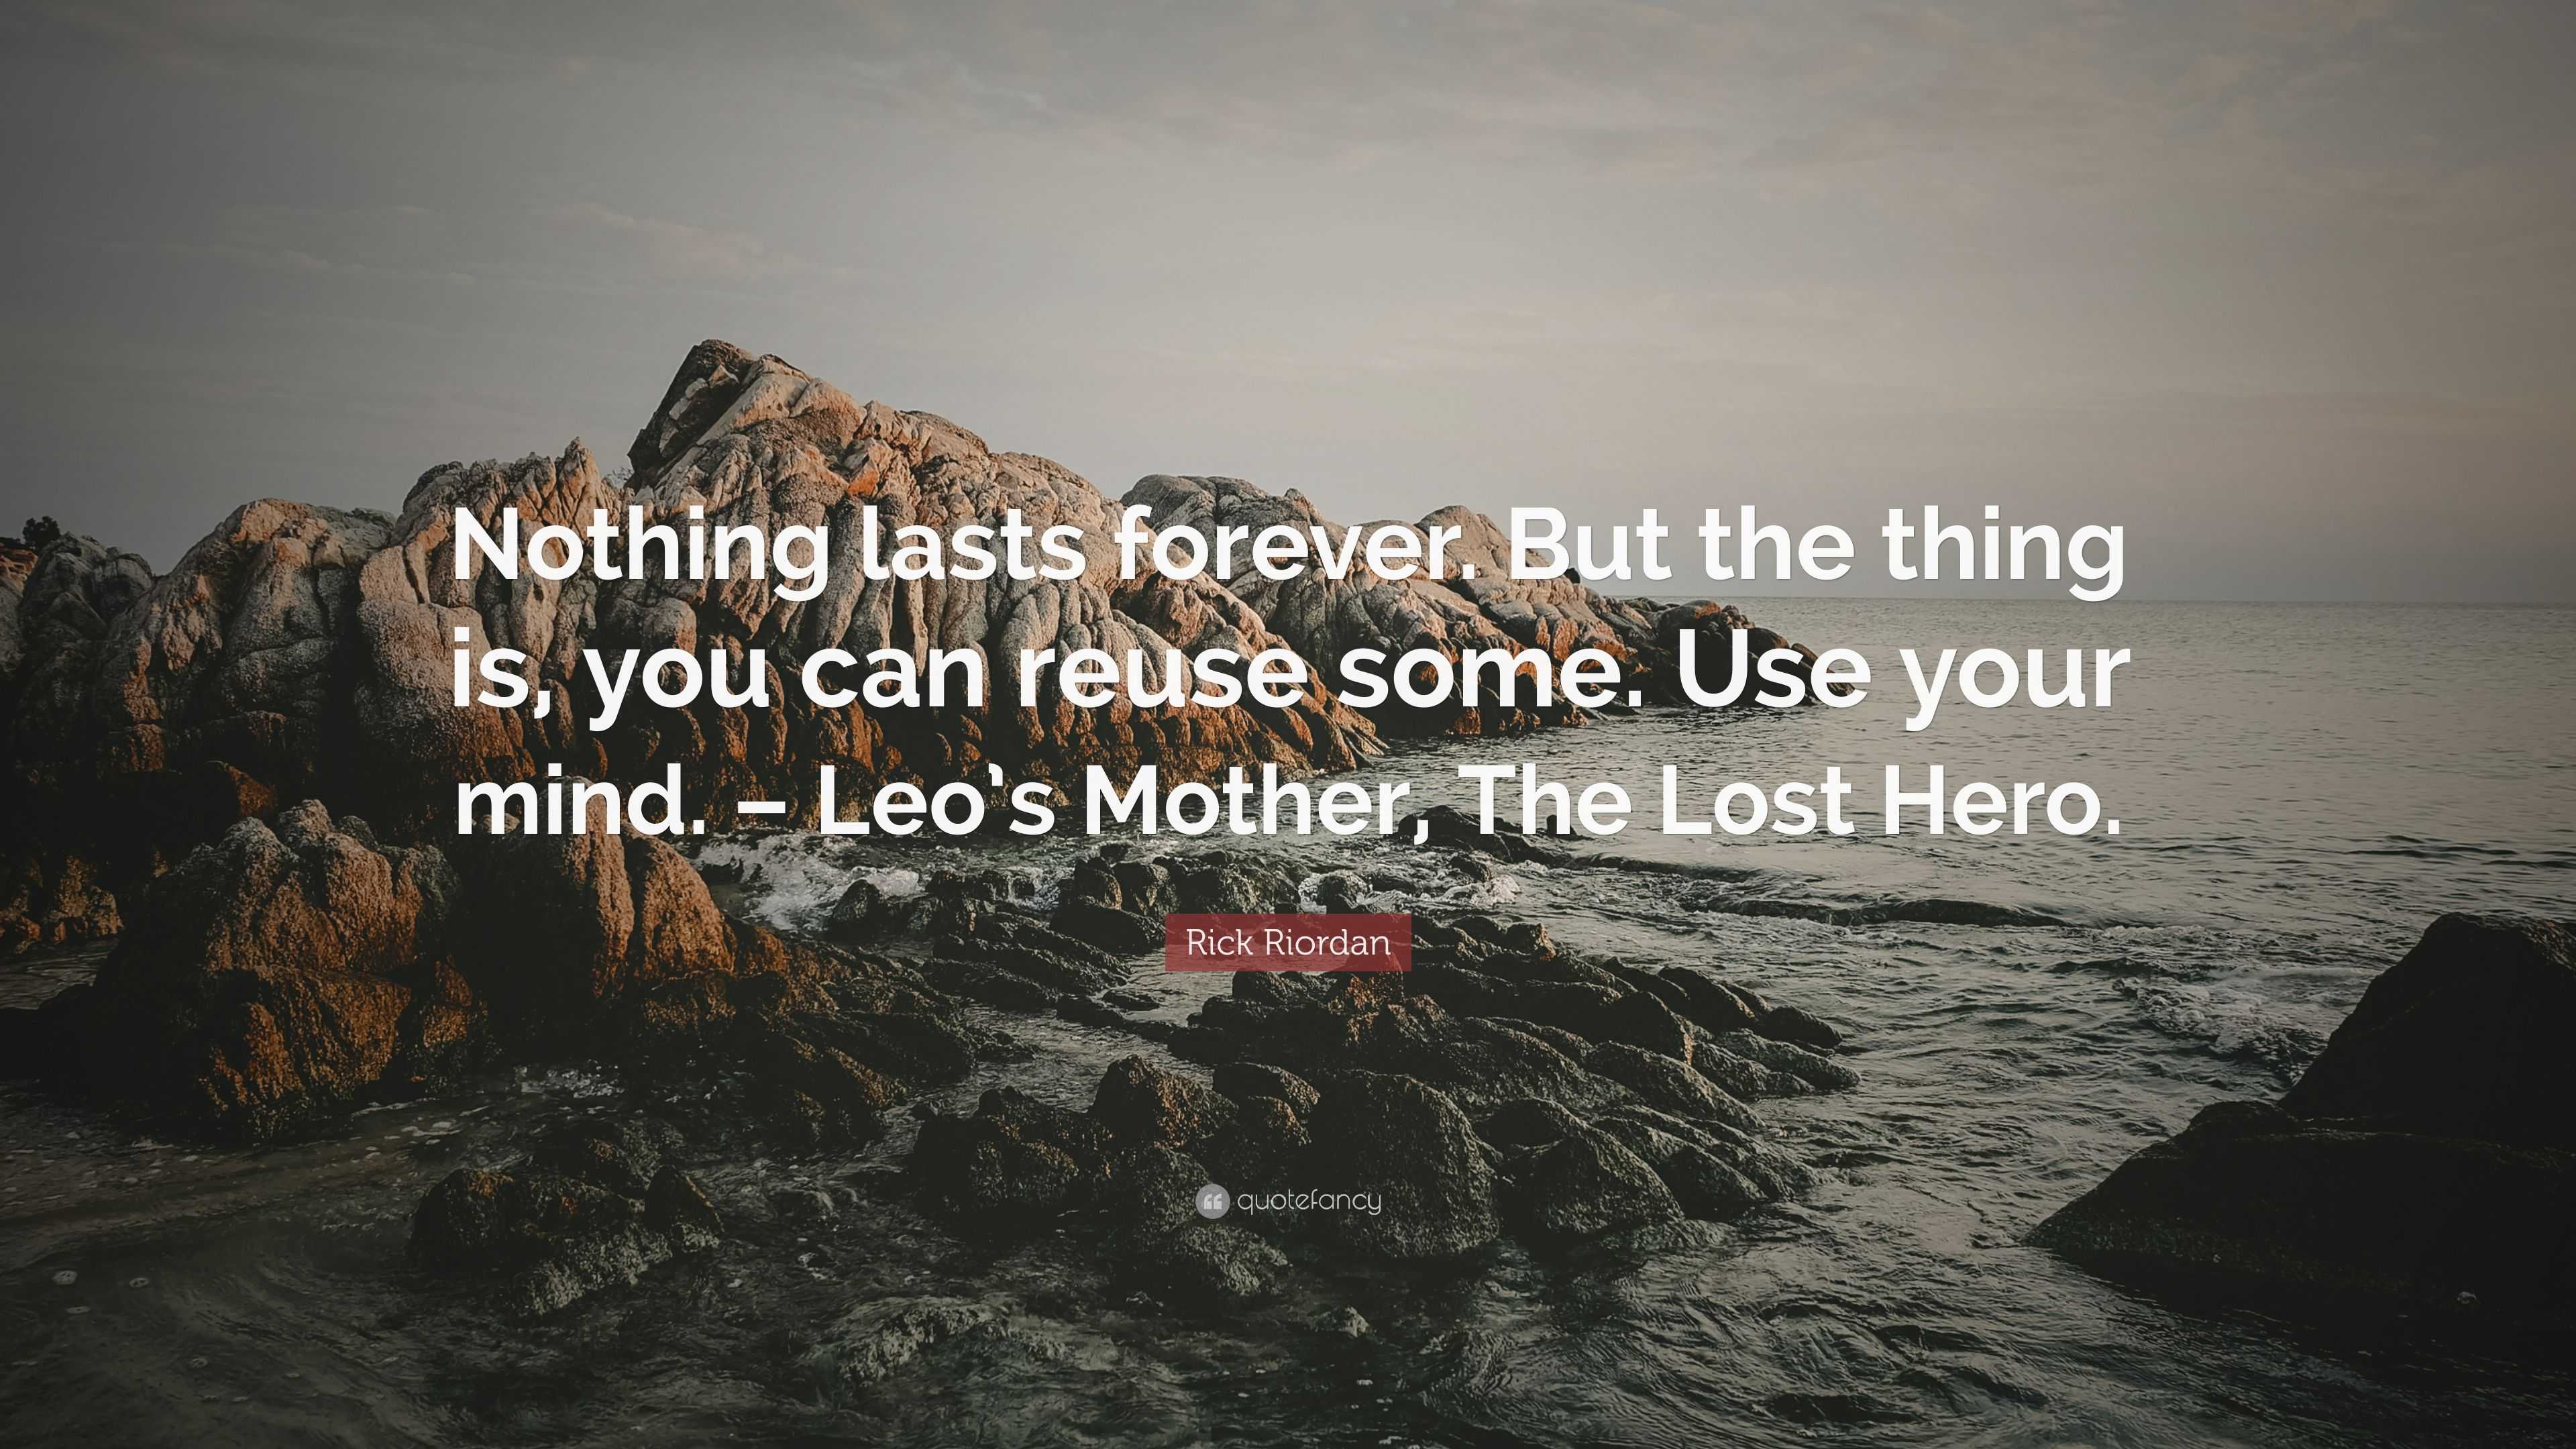 Rick Riordan Quote Nothing Lasts Forever But The Thing Is You Can Reuse Some Use Your